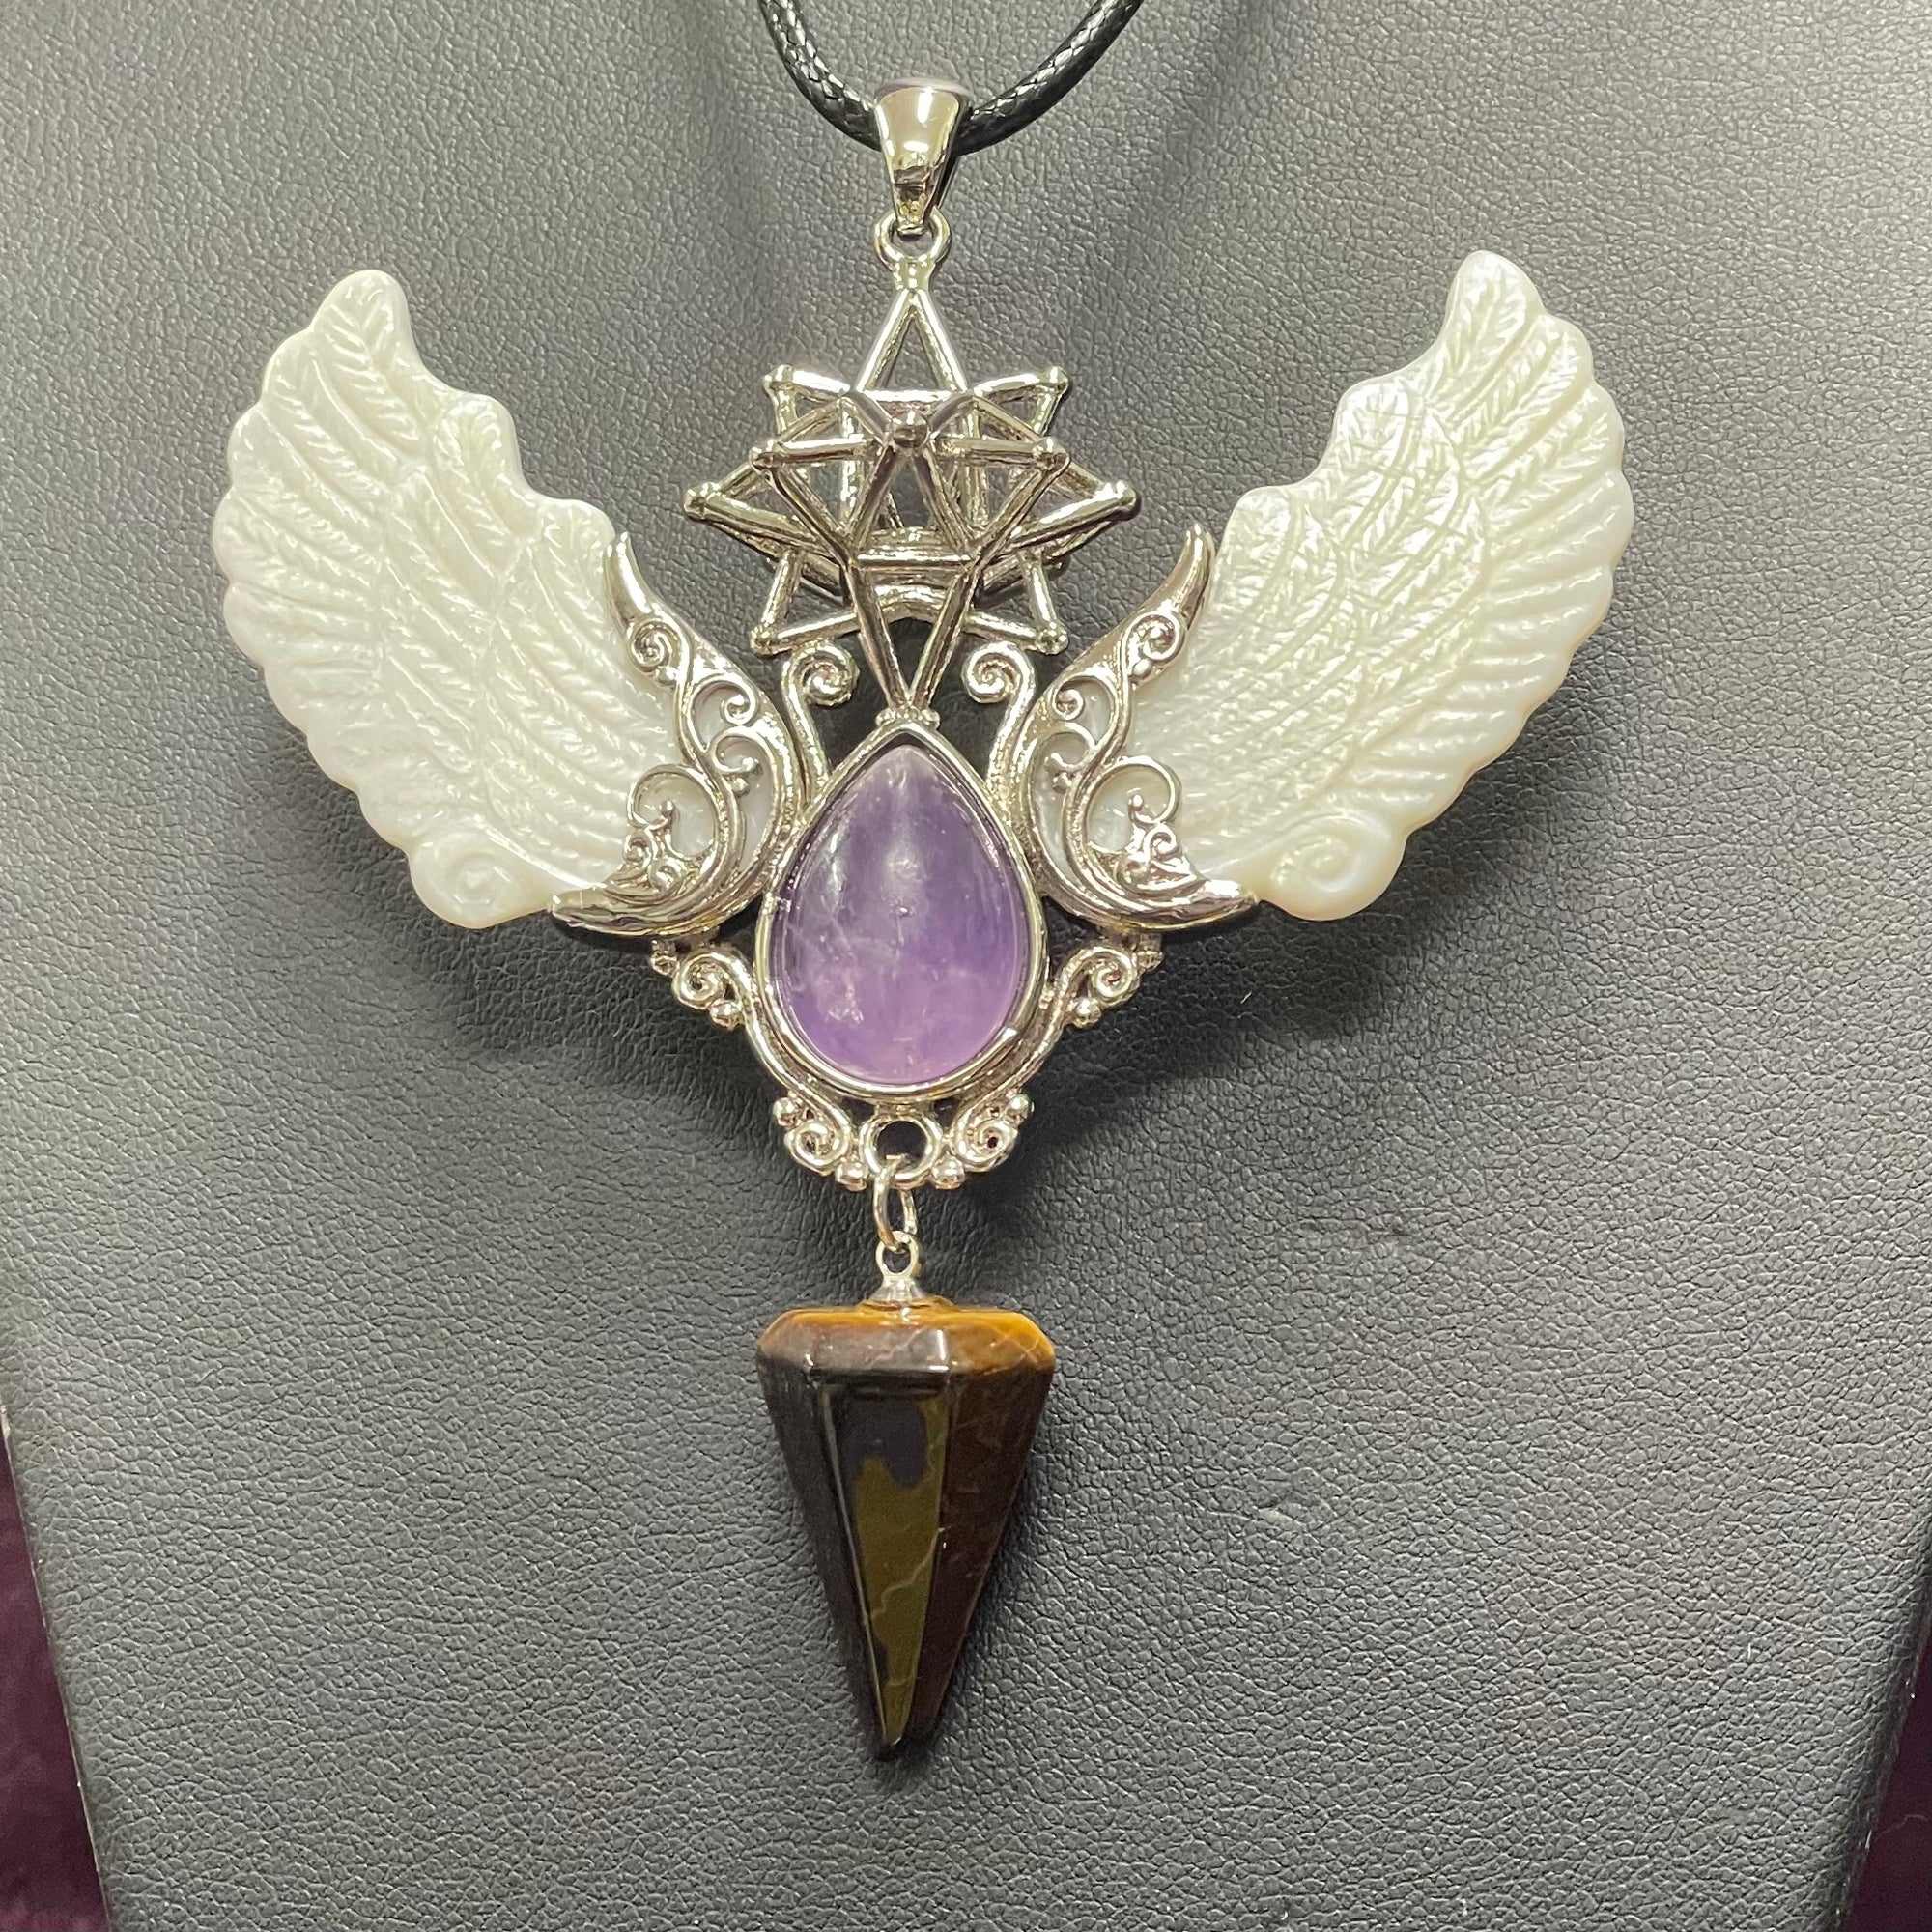 Alloy Carved Wing Pendant - Amethyst & Tigers Eye